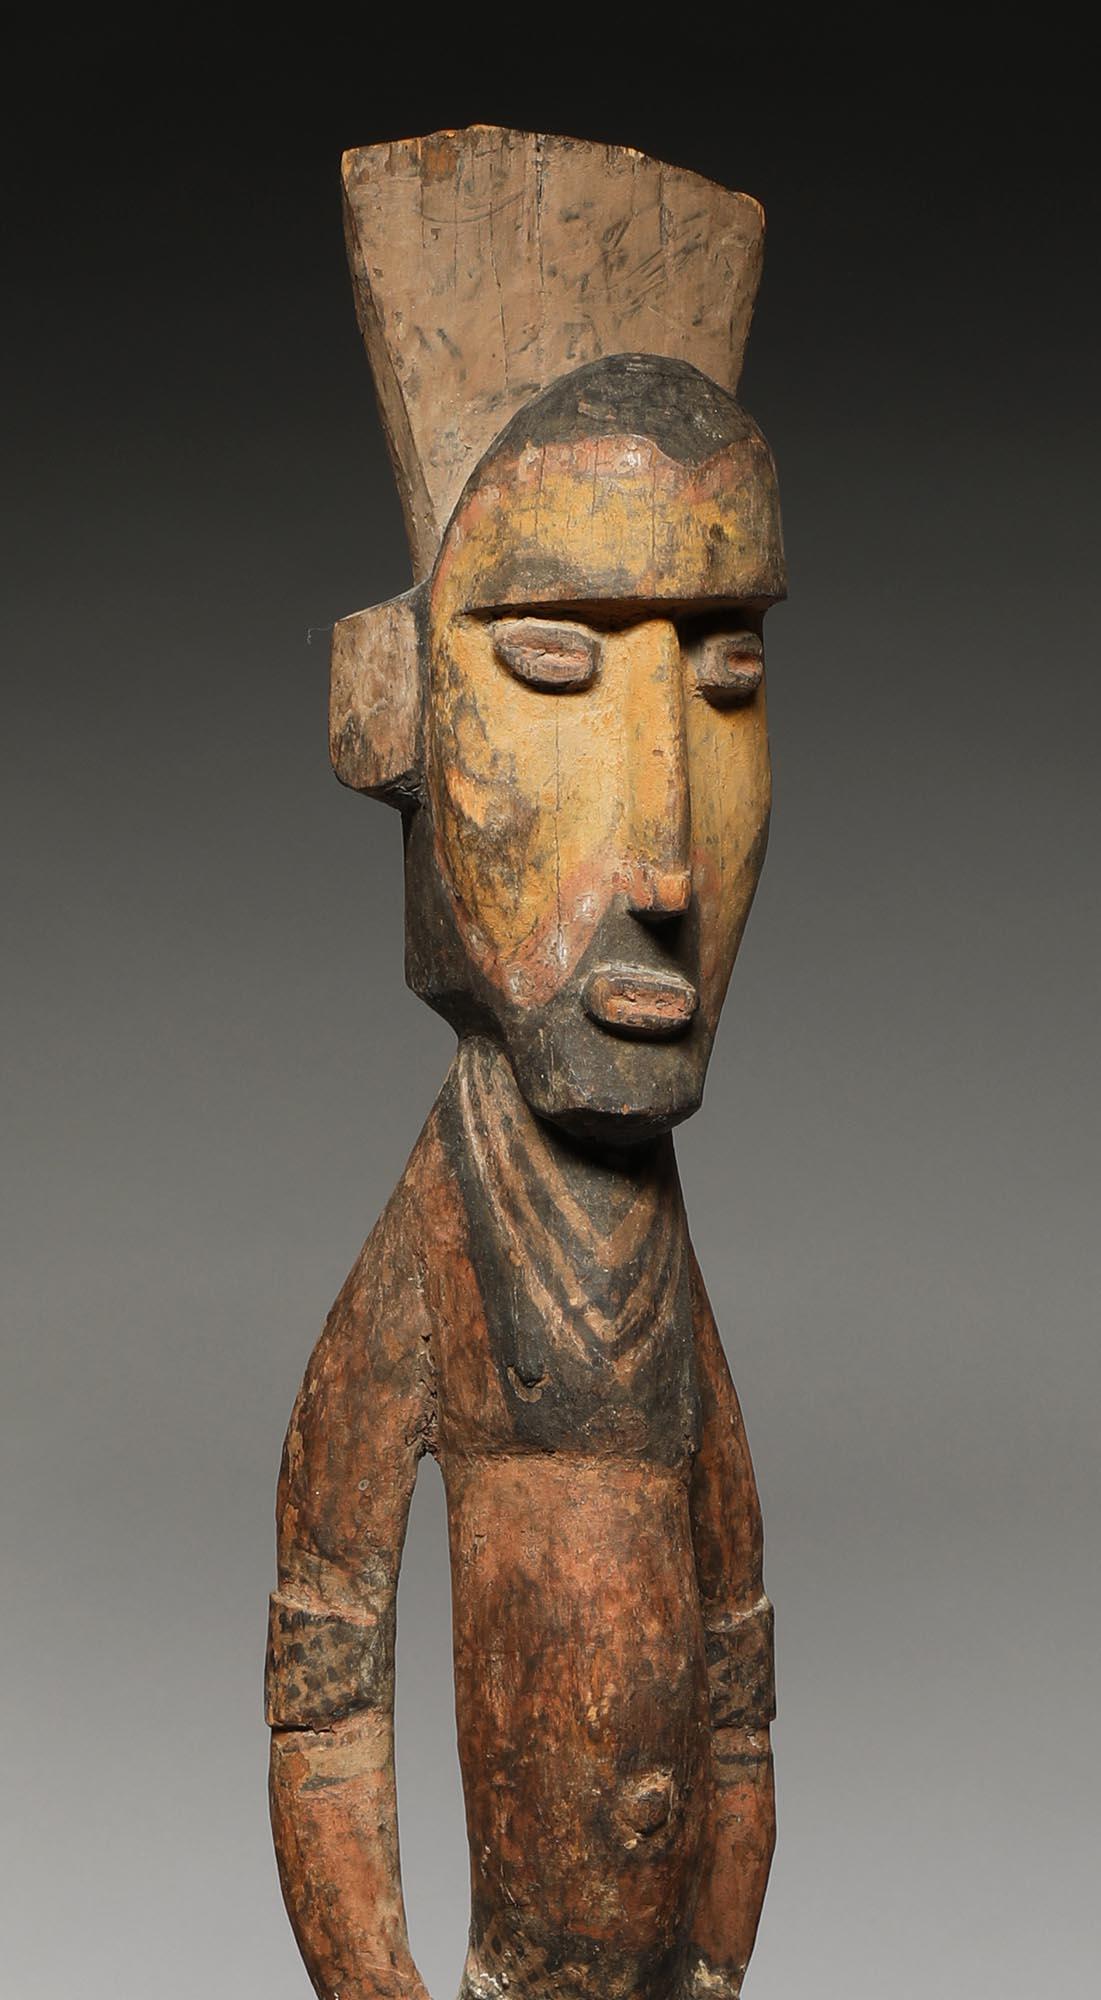 A tall thin standing figure carved of hard wood, with hands on hips, wearing armbands, with remains of yellow pigments on face, black beard and top of head, traces of red on body. Classic Maprik figure with strong expression, on custom metal base 39